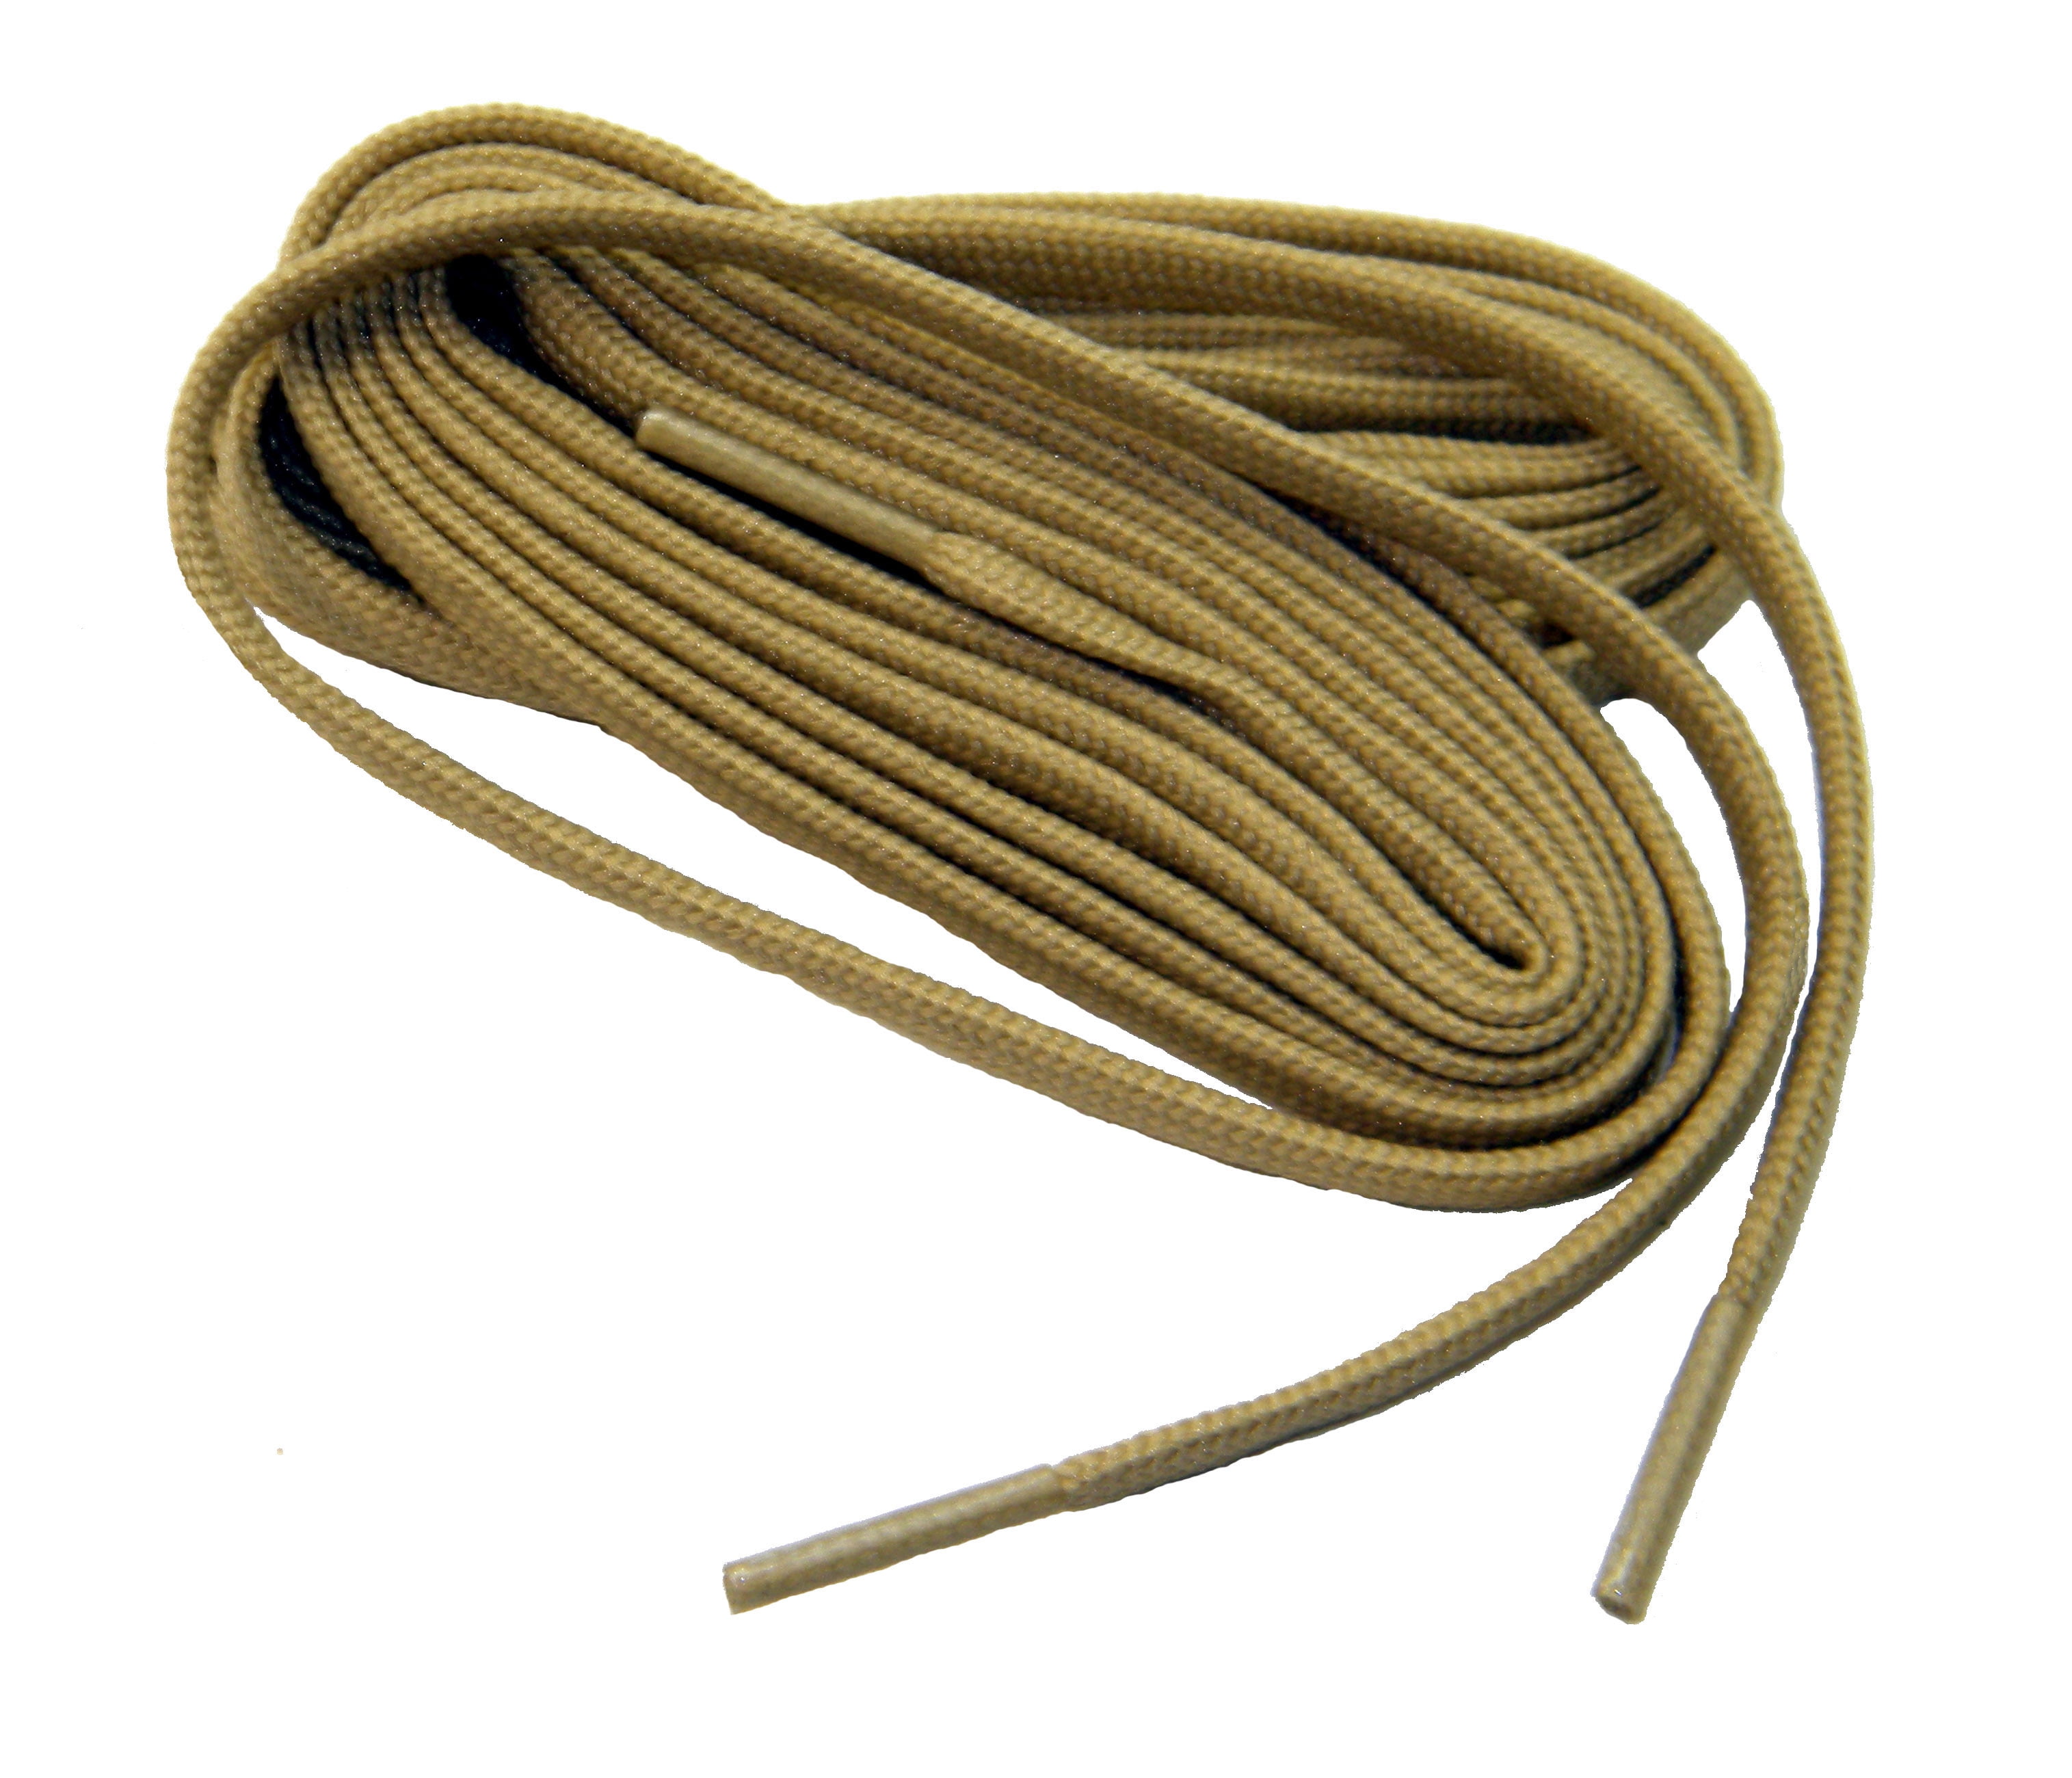 Unisex Shoelaces Fashion Waxed Shoe Laces Oxfords Bootlace Cord Round Shoestring 